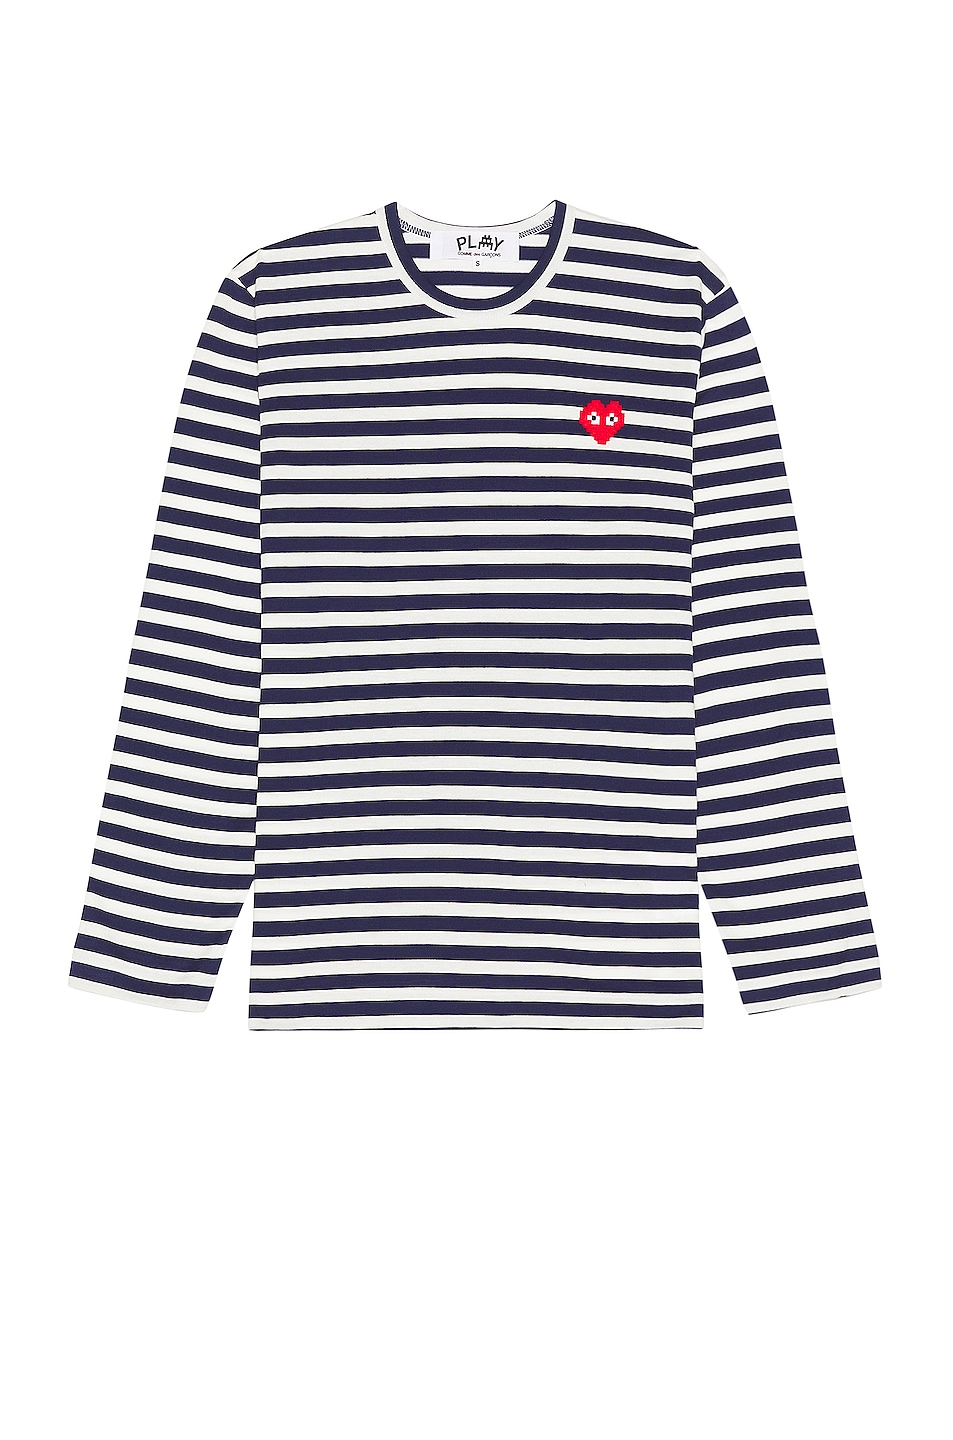 Image 1 of COMME des GARCONS PLAY Invader Stripe Long Sleeve T-Shirt in Navy & White